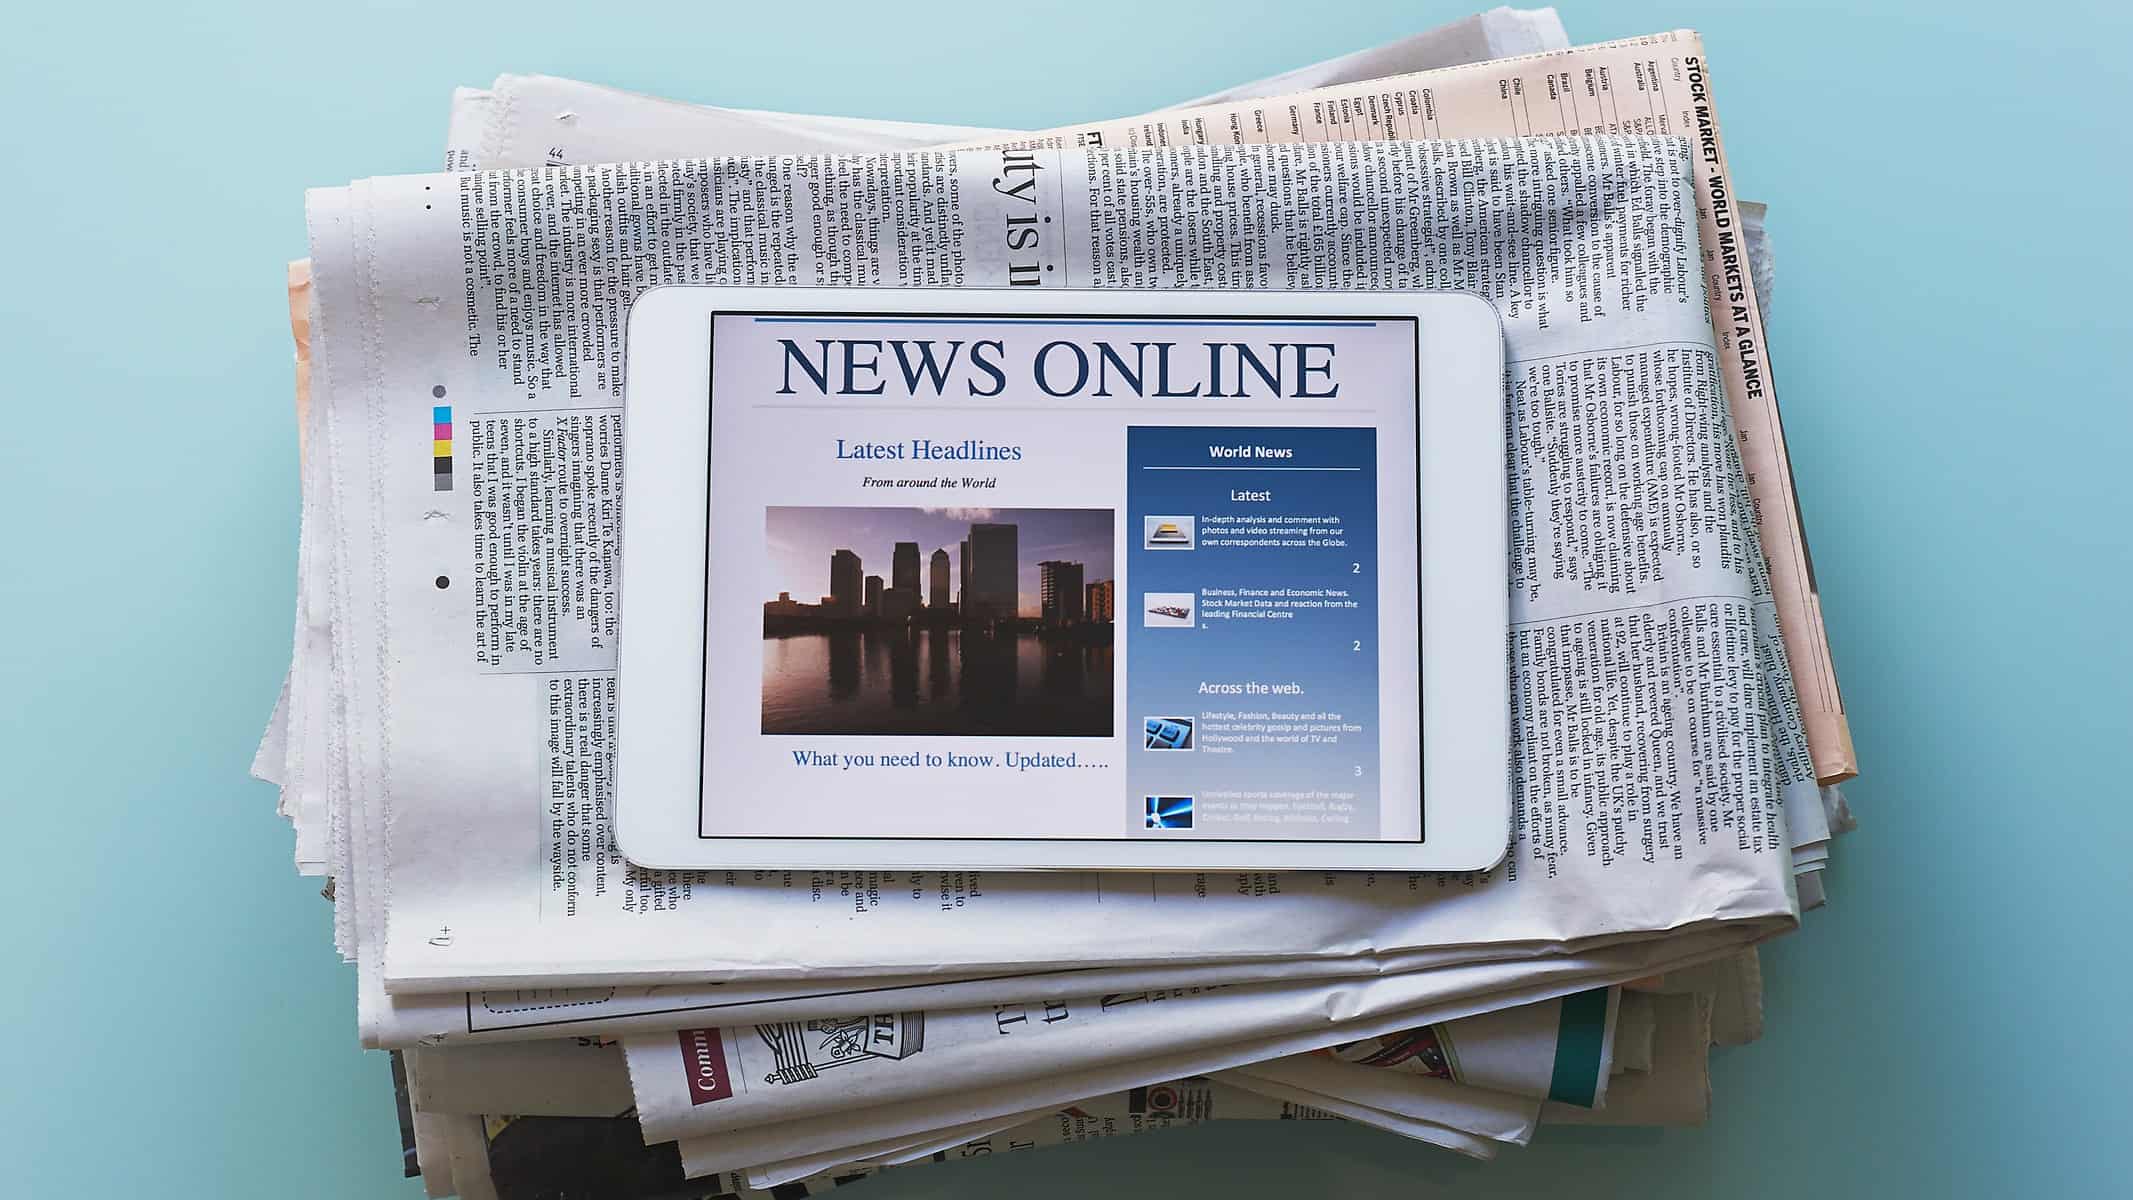 Media newspapers and tablet reporting the news online